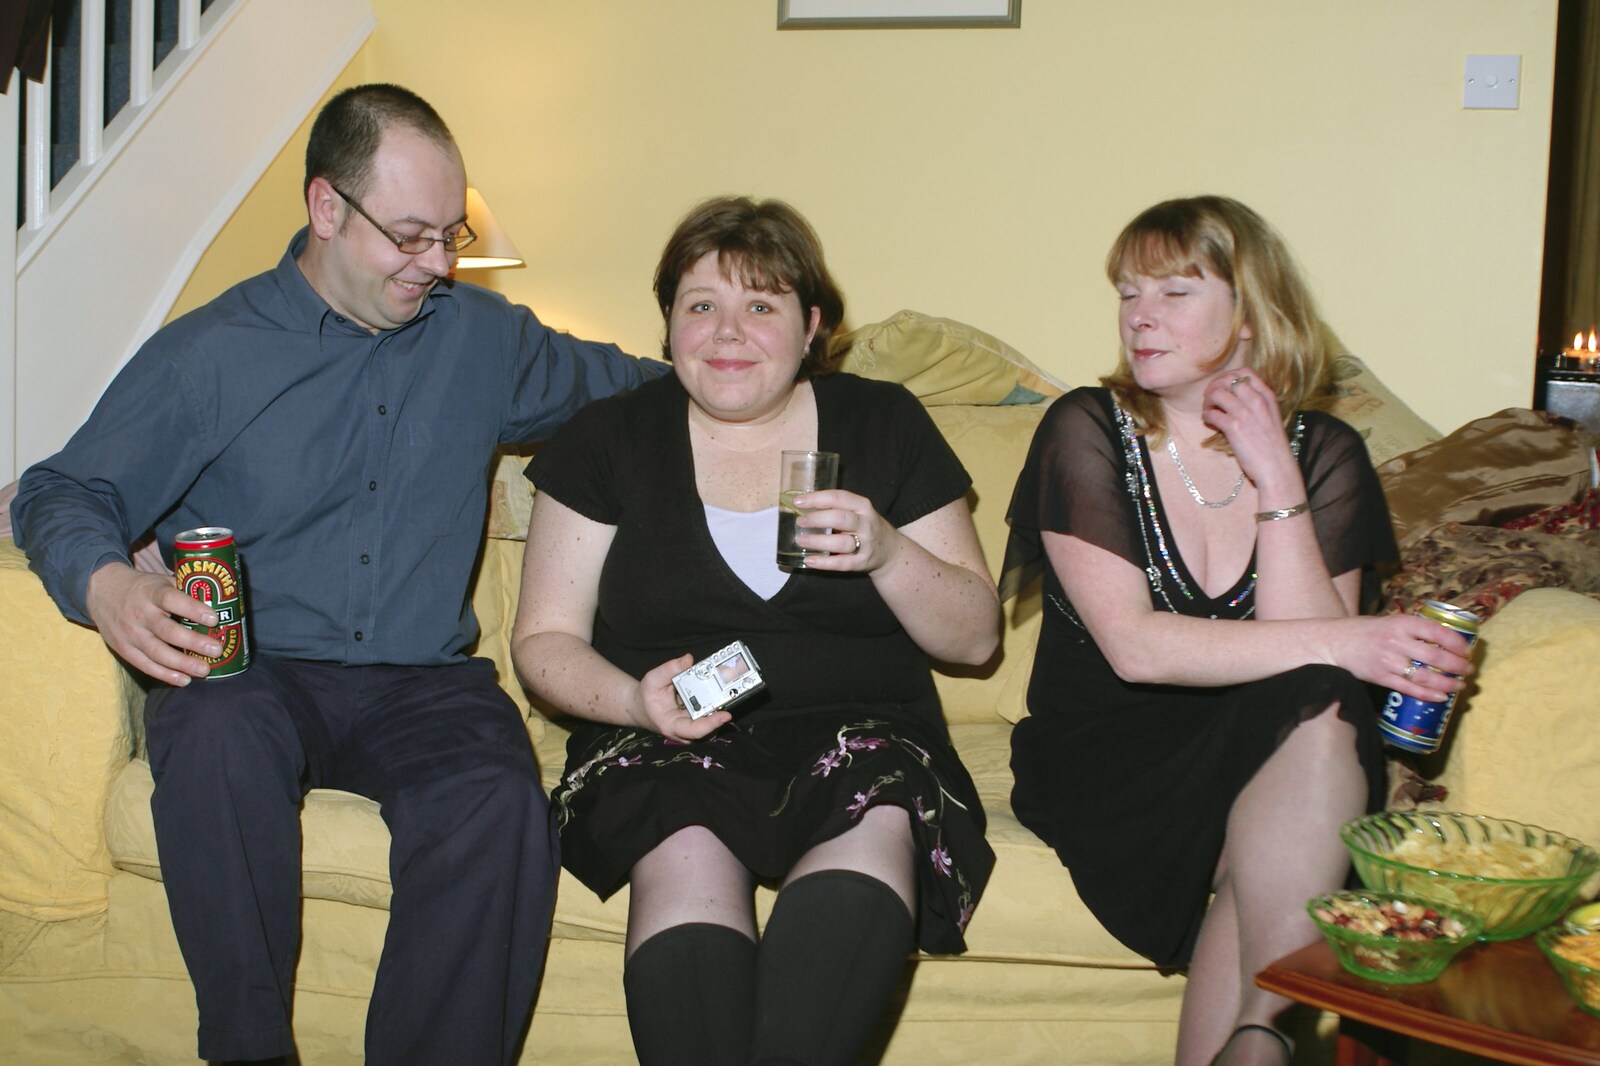 The Old Man's 70th Birthday, Pontefract, West Yorkshire - 29th January 2005: Matt, Sis and Mel on the sofa